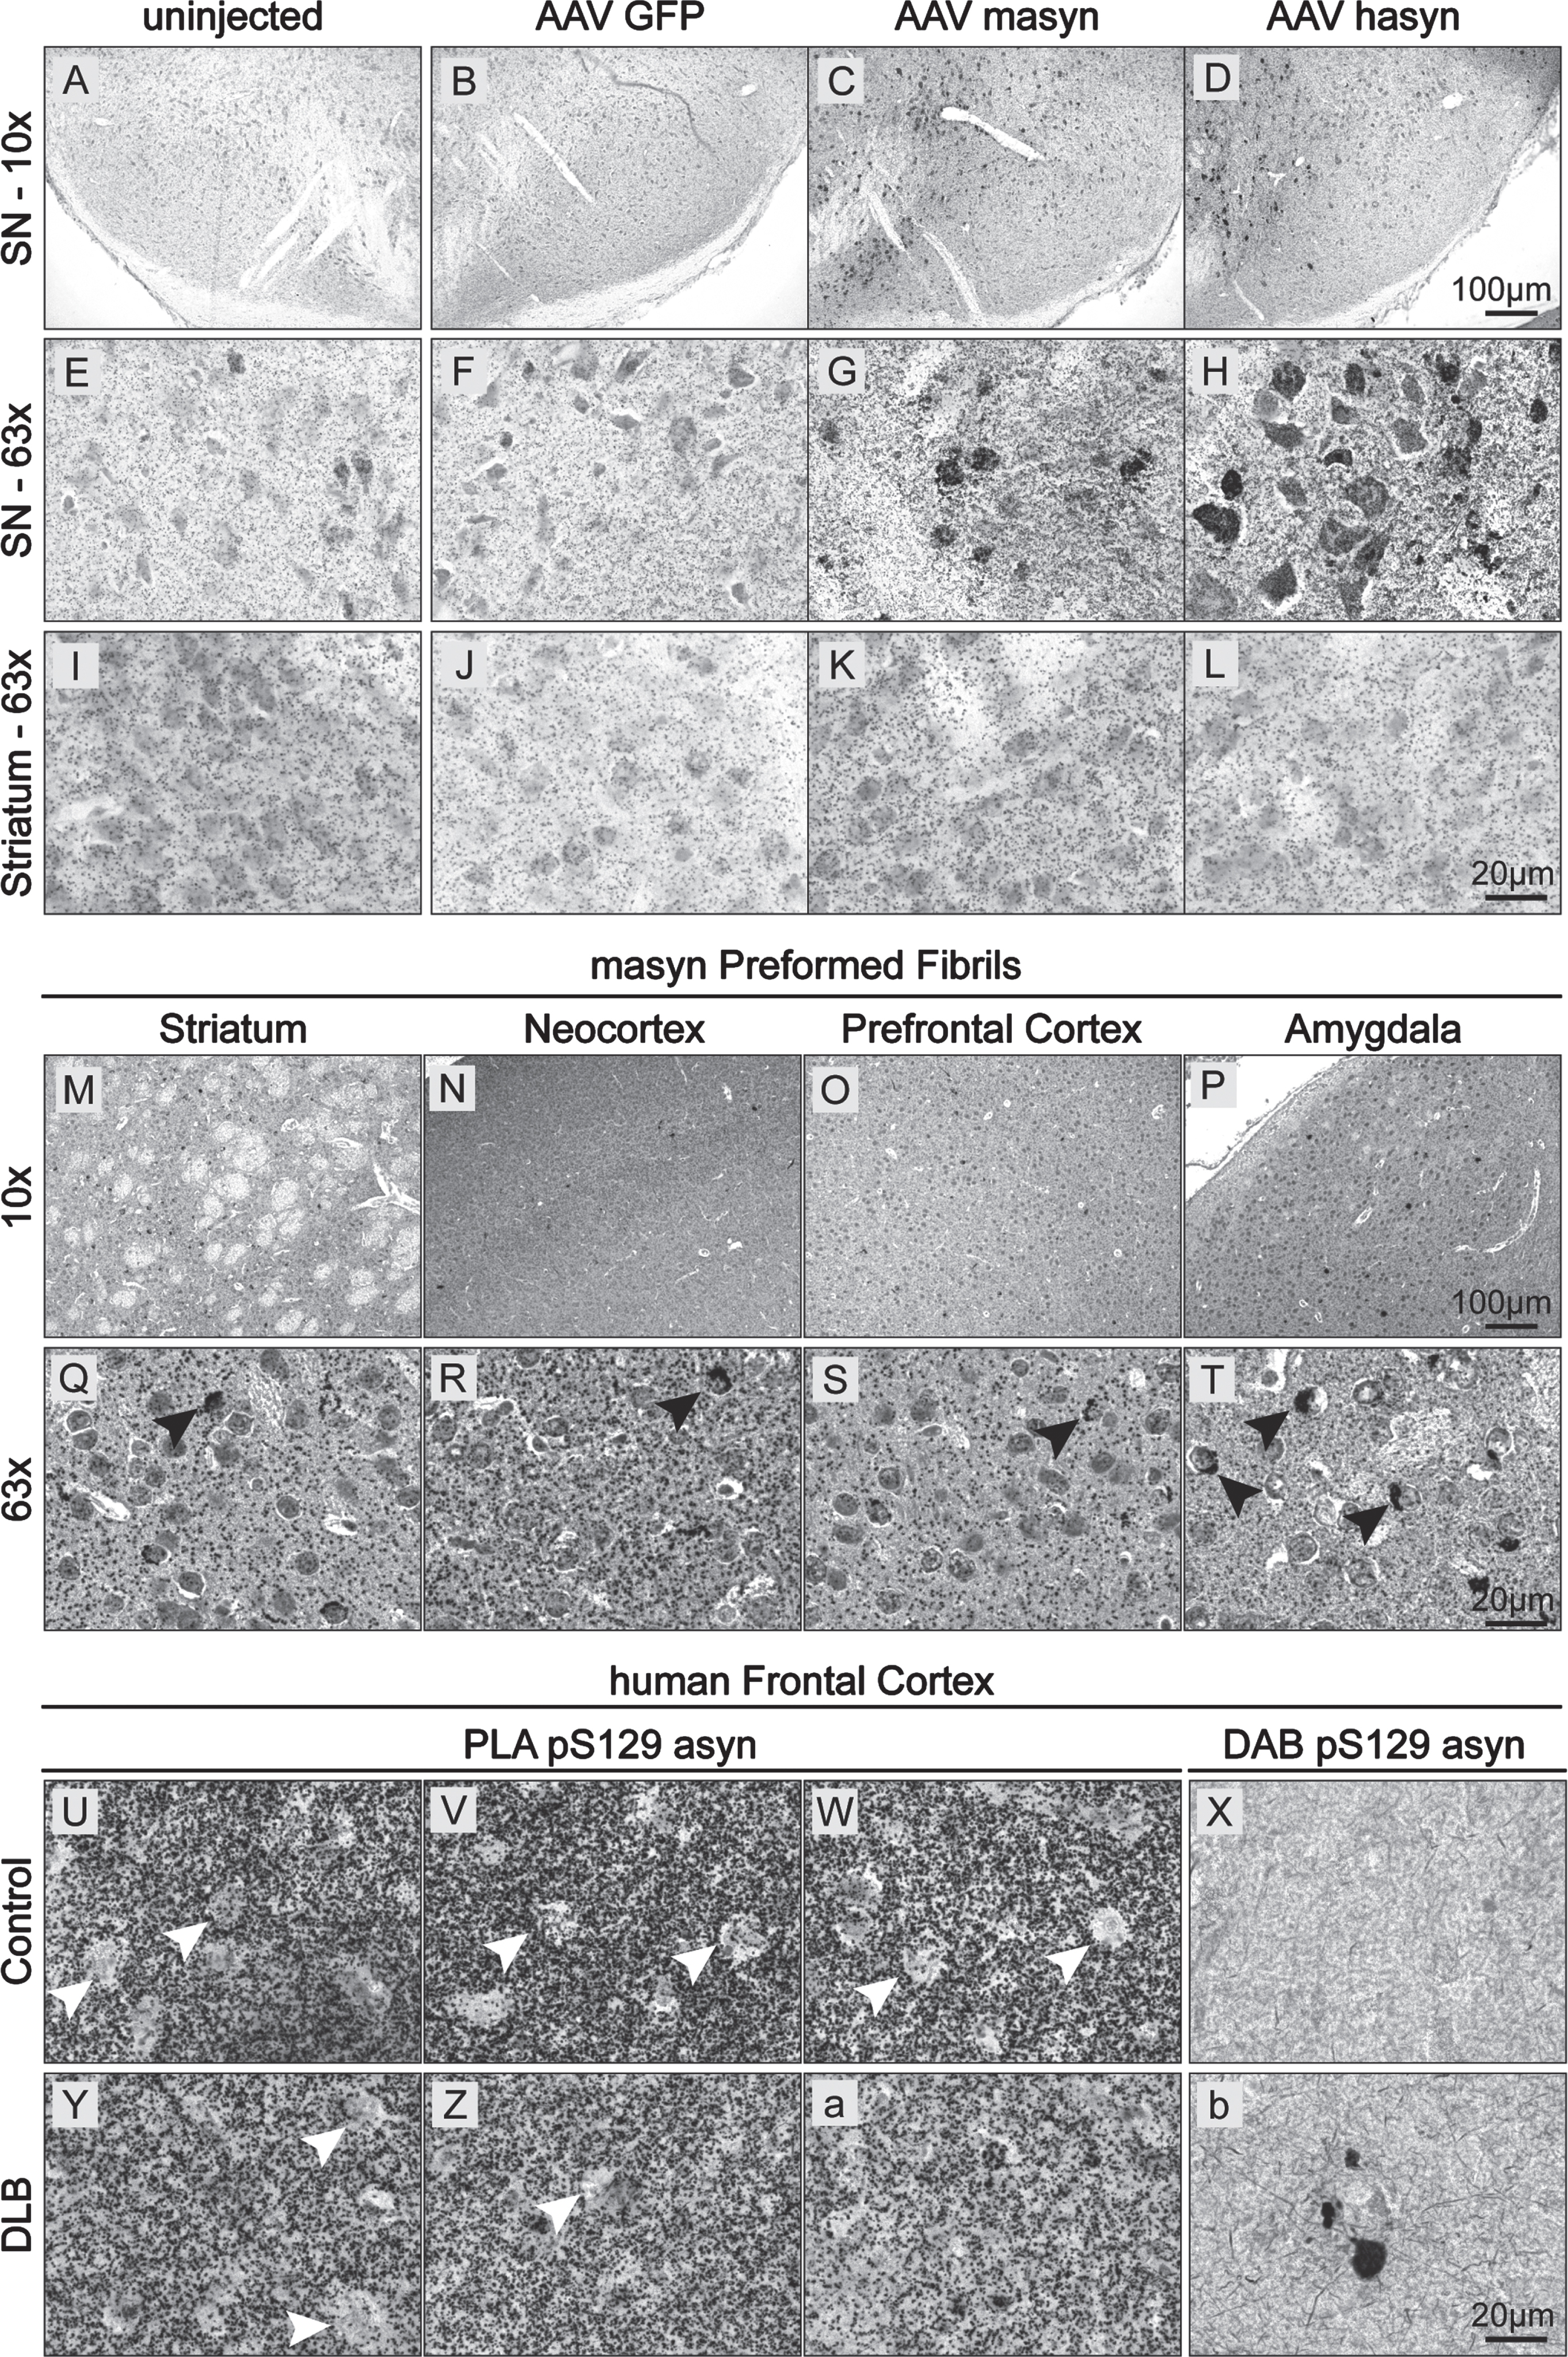 BF-PLA used on sections from animal models and human frontal cortex. A–L) Mice were injected with AAV expressing either GFP (B,F,J), mouse asyn (masyn) (C,G,K) or human asyn (hasyn) (D,H,L). Four weeks after injection, the brains were fixed, cut into 30μm thick sections, and stained using the BF-PLA. Uninjected sides were used as a baseline control (A,E,I). Images were taken either with 10x (A–D) and 63x (E–L) magnification. (M–T) Mice were injected with asyn PFF into the striatum. One month after injection, the mice brains were fixed, embedded in paraffin, cut into 6μm thick sections, and stained using the BF-PLA. Images of striatum (M,Q), neocortex (N,R), prefrontal cortex (O,S) and amygdala (P,T) were taken at 10x (M–P) and 63x (Q–T) magnification. Accumulation of pS129 asyn staining in cell bodies indicated by black arrows (Q–T). U-b) Human frontal cortical sections from a healthy control (Case 5) (U–X) and a DLB patient (Case 1) (Y-b) were acquired from ADRC and stained using the BF-PLA protocol. Images were taken at 63x magnification. The monoclonal pS129 asyn antibody, 81A, was used singly to confirm the presence and absence of LBs in the DLB patient tissue and healthy control tissue, respectively (X,b).